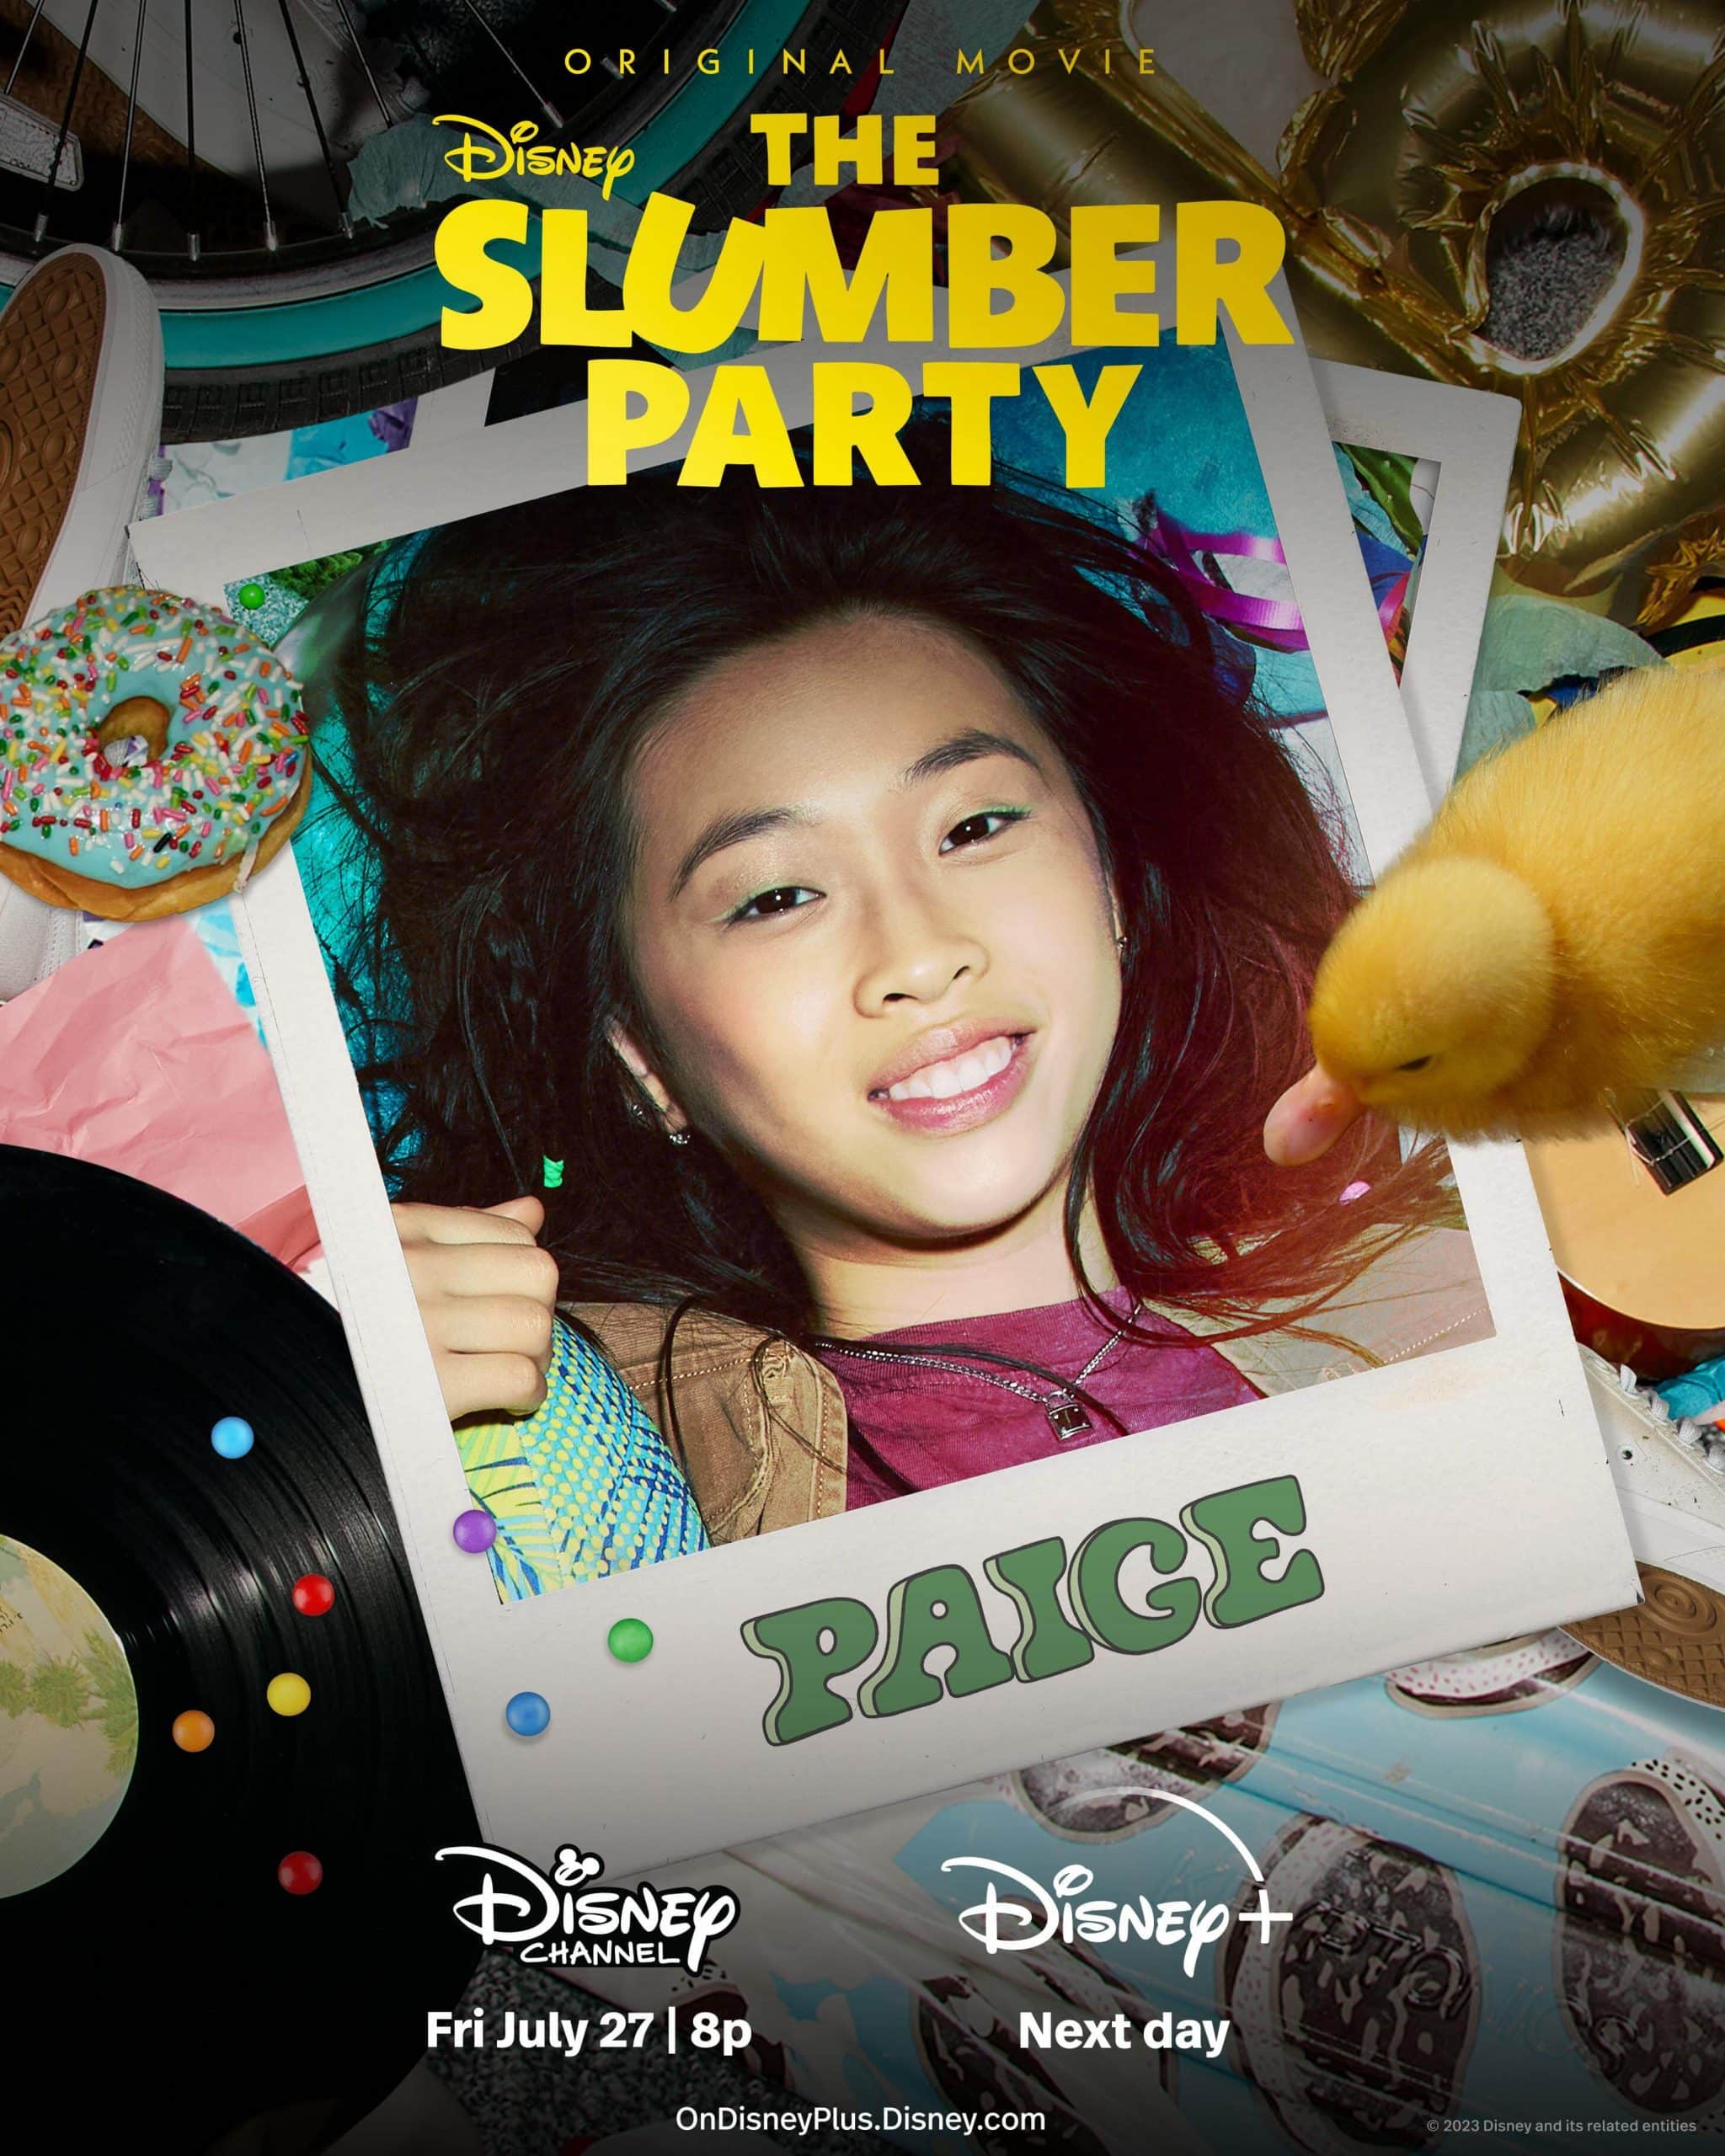 Disney’s “The Slumber Party” Character Posters Released What's On